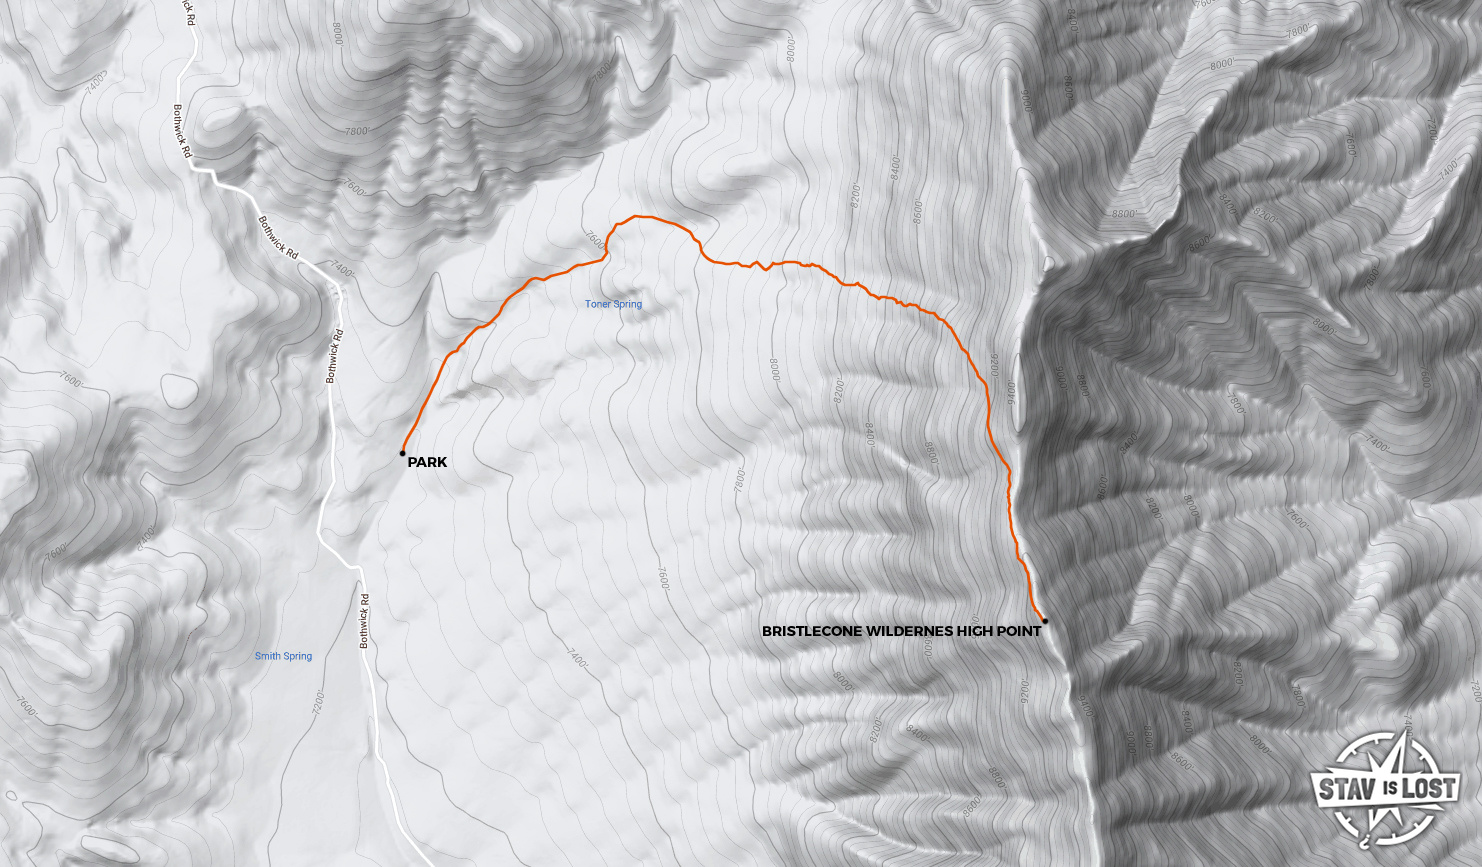 map for Bristlecone Wilderness High Point by stav is lost